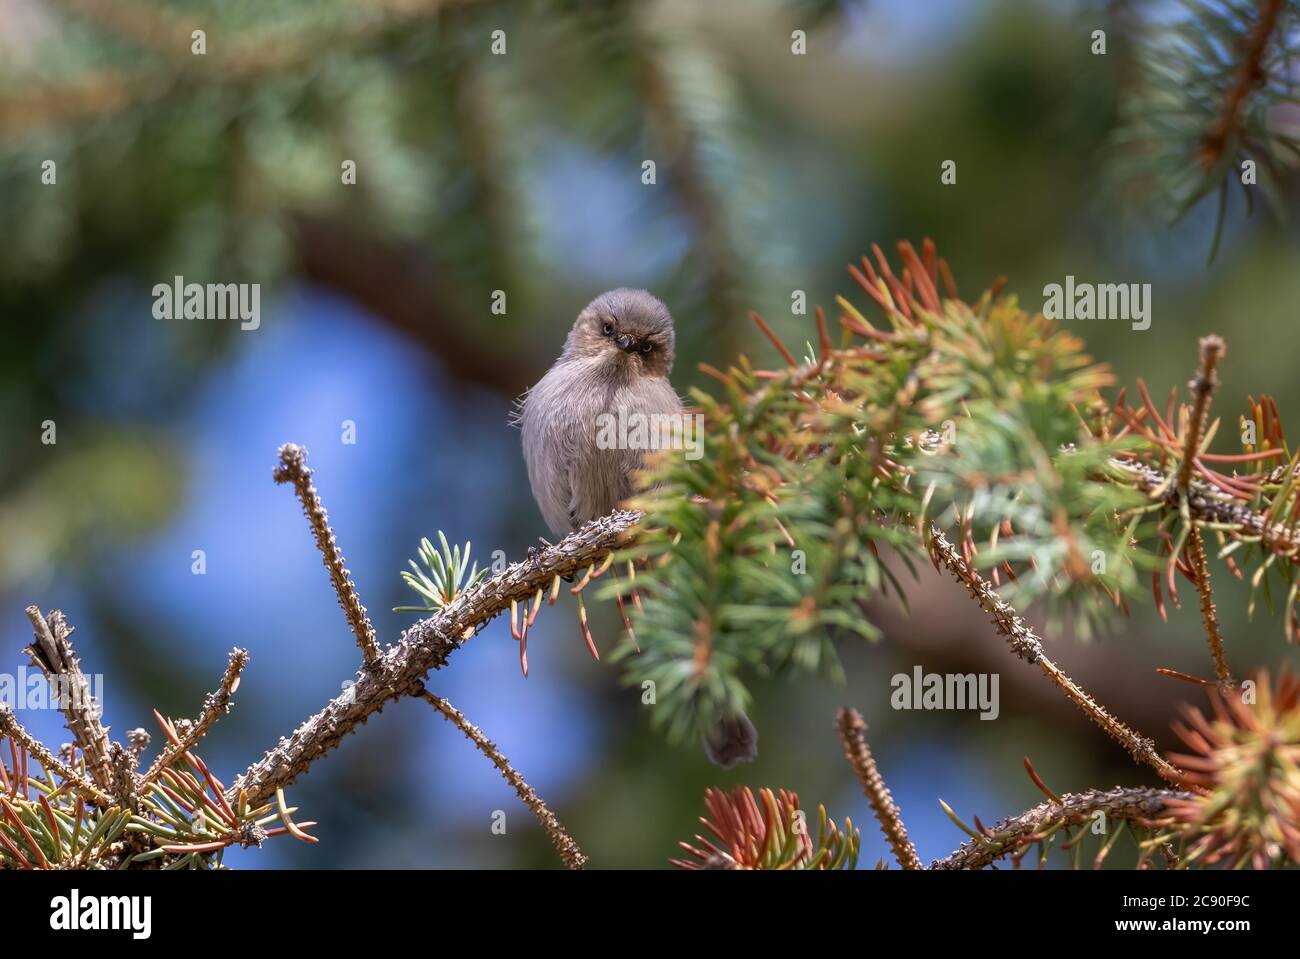 A female American Bushtit bird on a Conifer tree makes eye contact from her perch above. Stock Photo